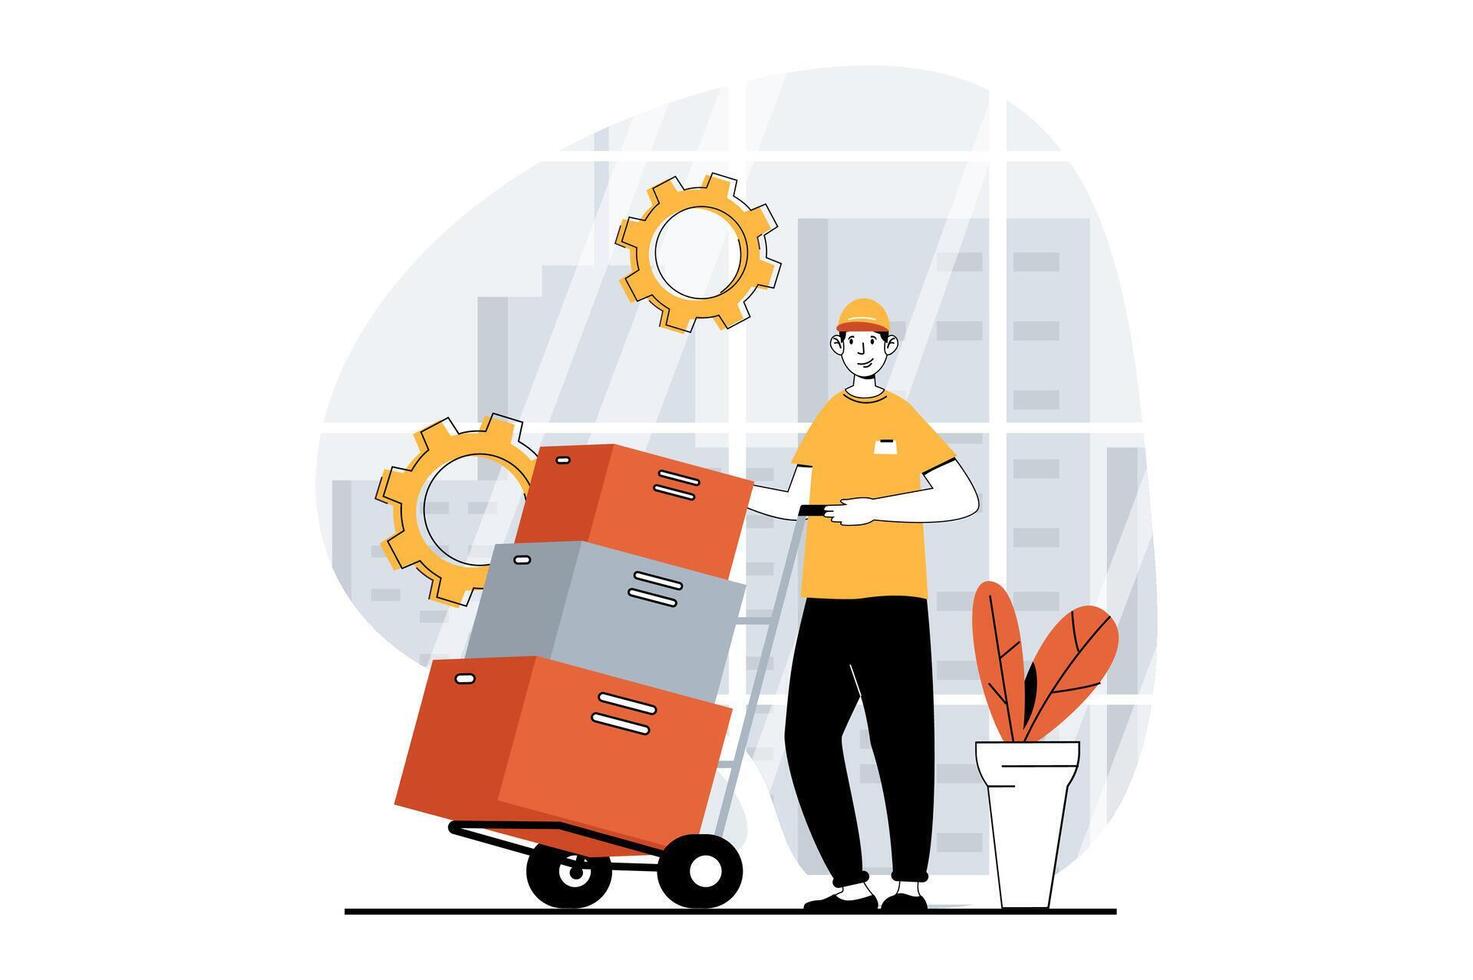 Delivery service concept with people scene in flat design for web. Man carrying parcel boxes on forklift and works in warehouse. Vector illustration for social media banner, marketing material.